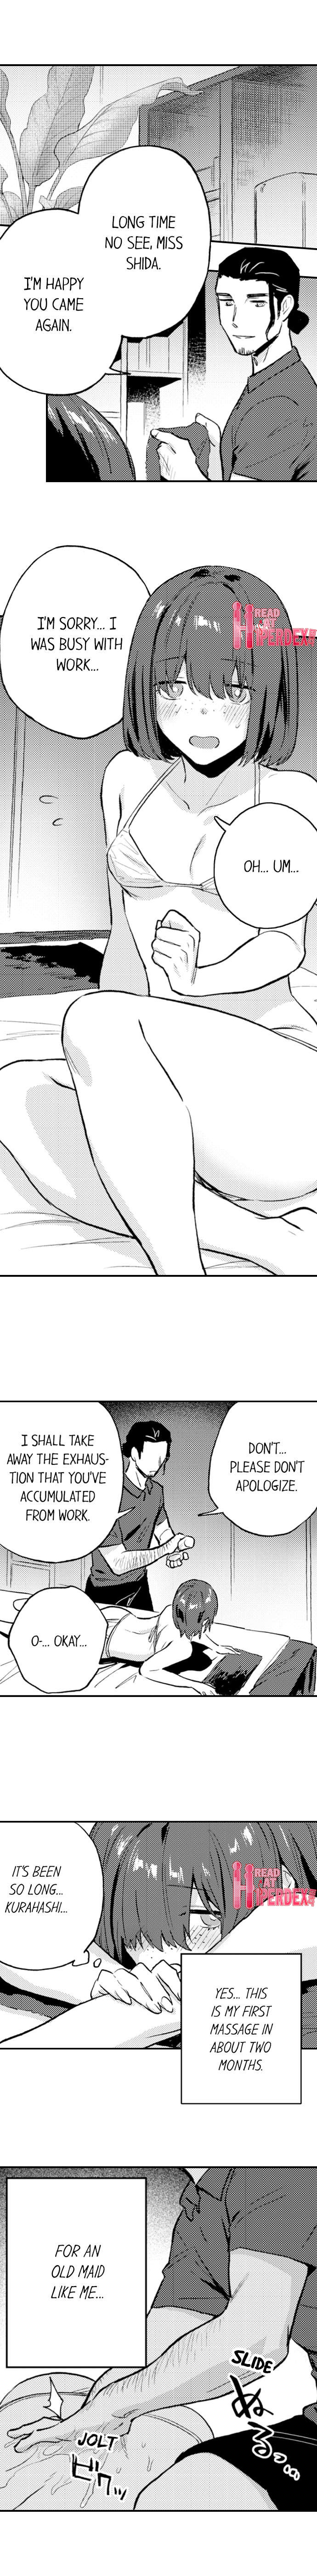 The Massage ♂♀ The Pleasure of Full Course Sex Chapter 1 - Page 2